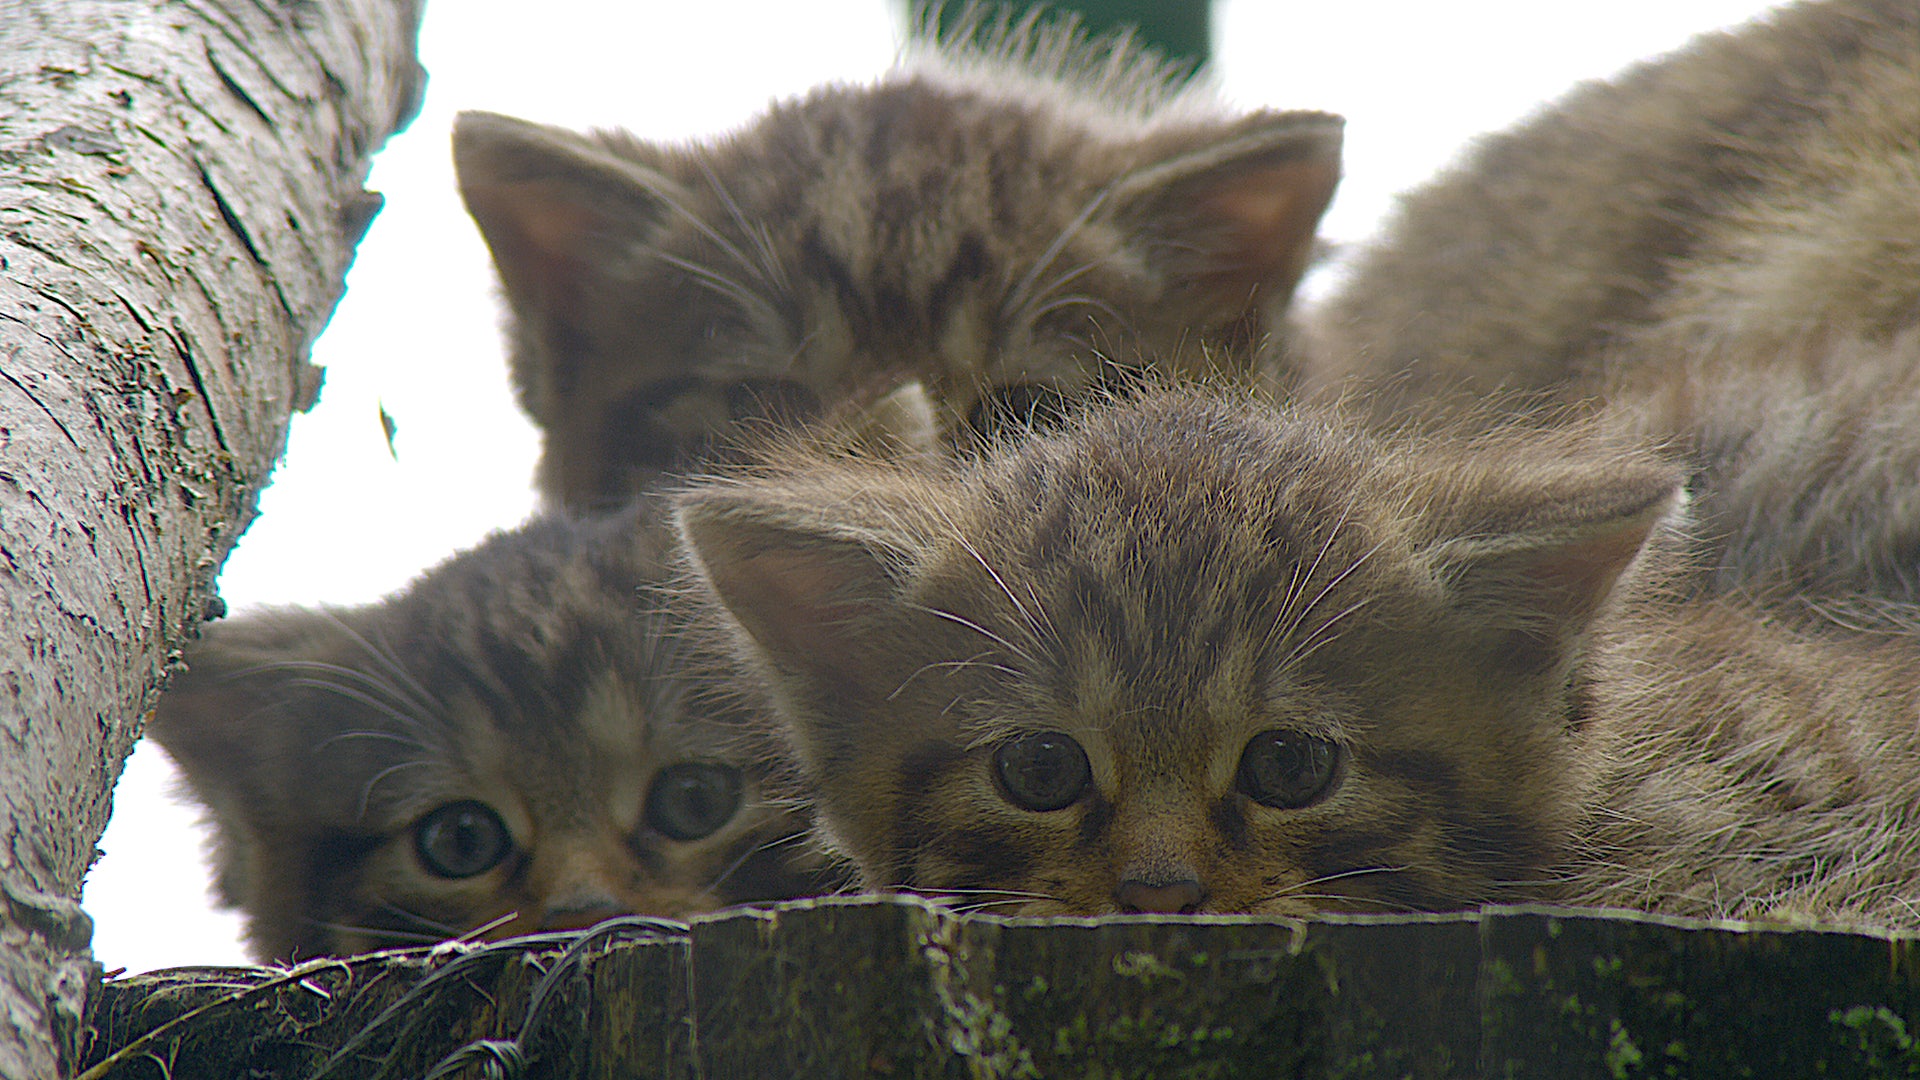 First wildcat arrives at breeding centre ahead of release into the